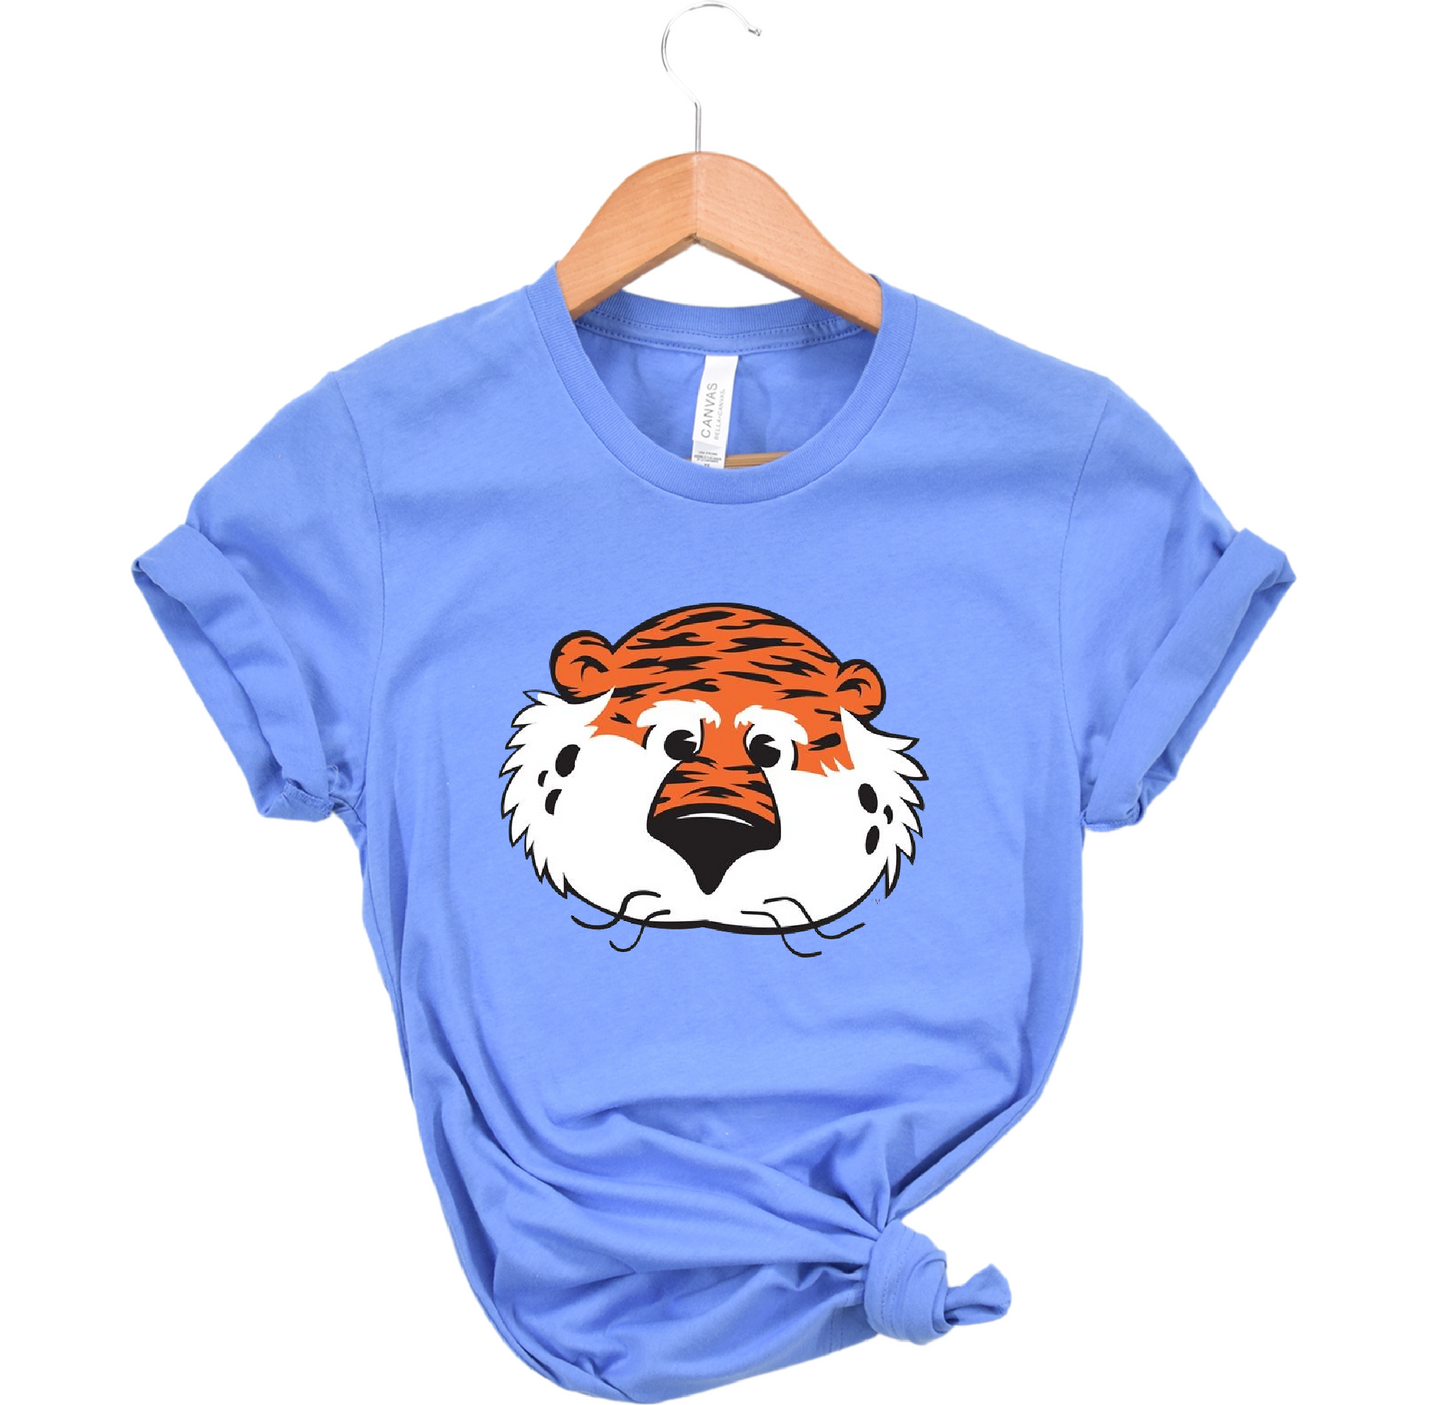 Aubie Tee/ Comfort Colors or Bella Canvas/ Youth and Adult Sizes